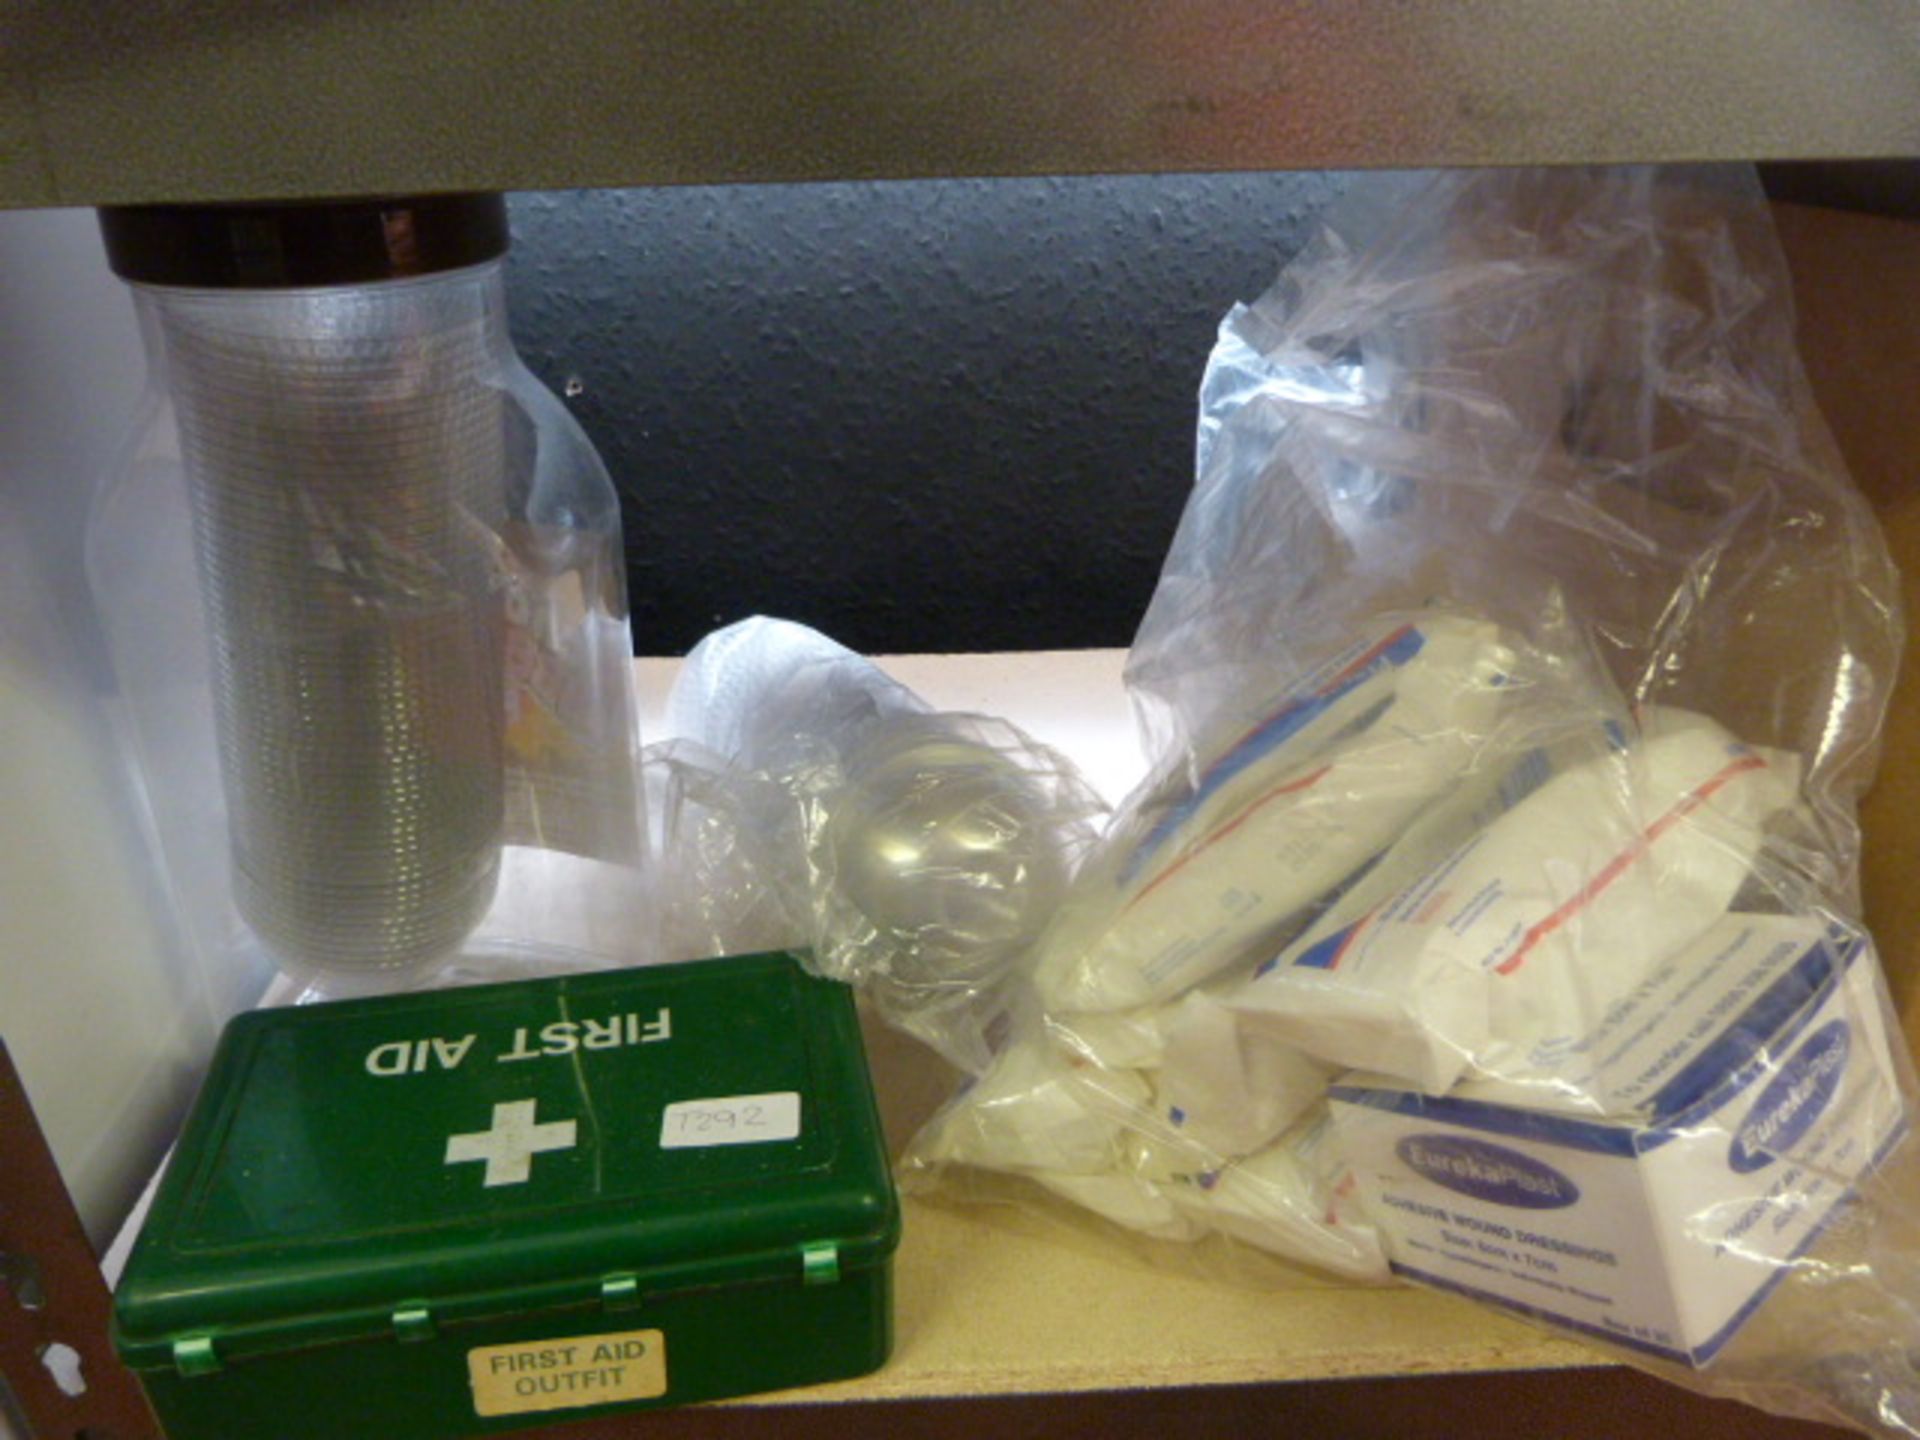 First Aid Kit, Bag of Sterile Unmedicated Dressing